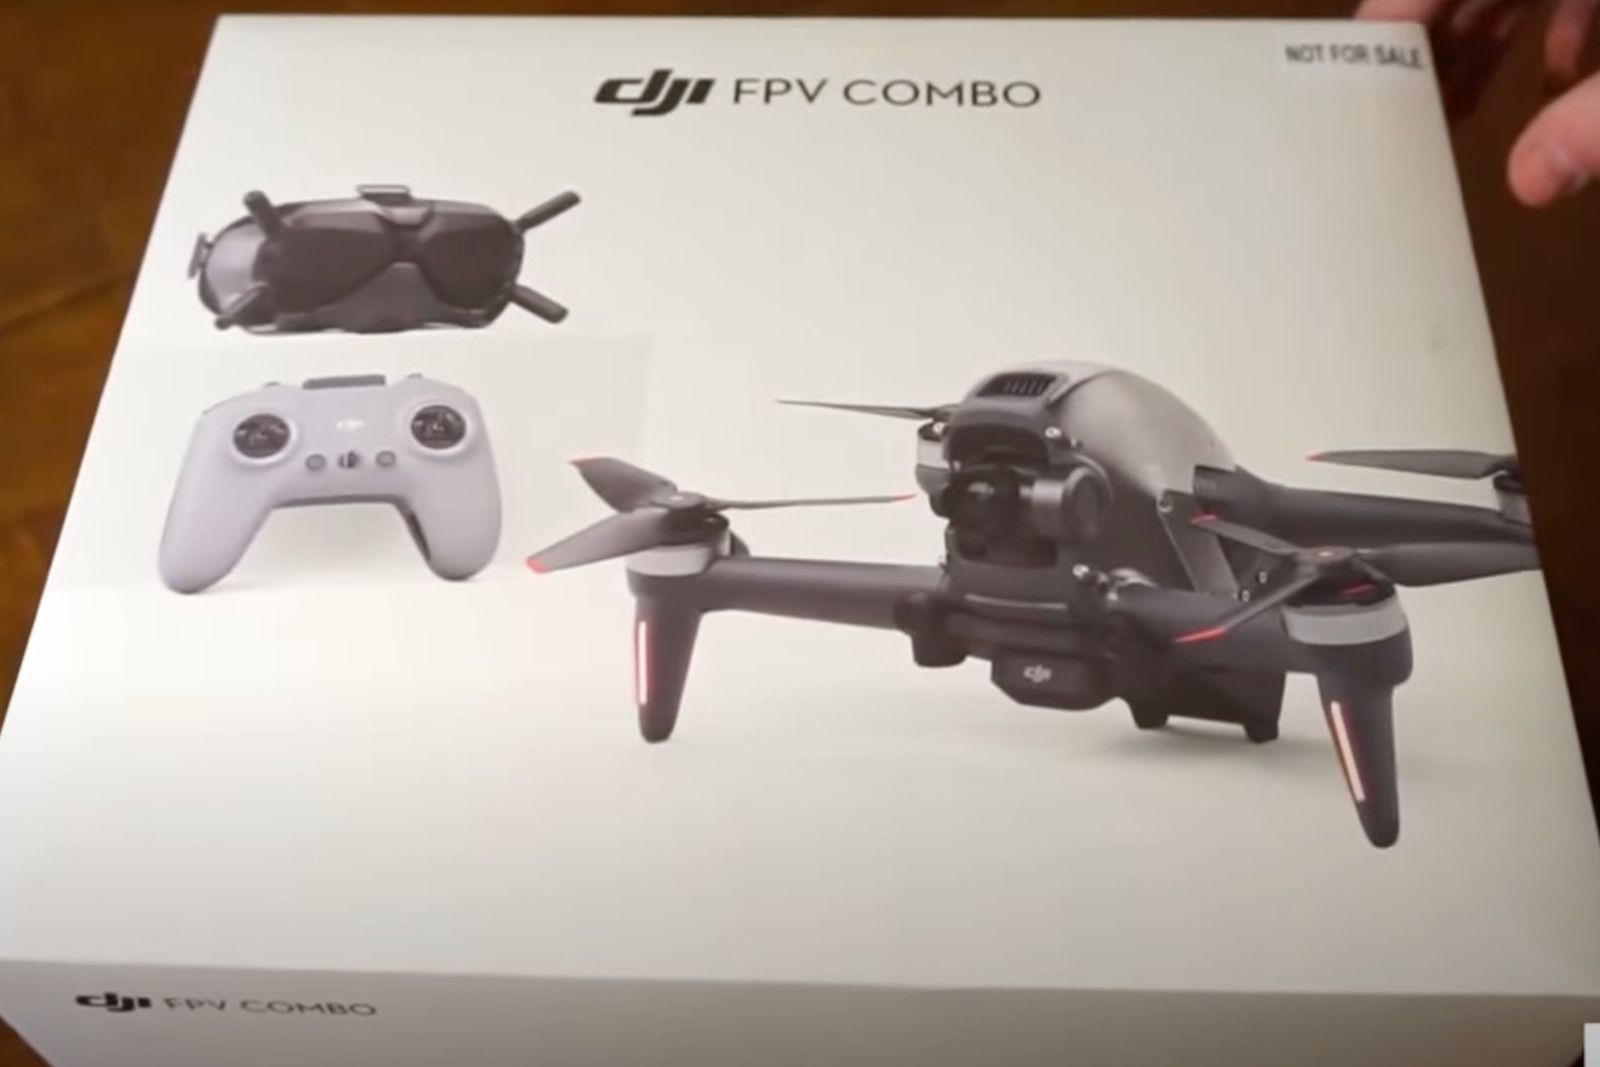 DJI FPV drone unboxed ahead of launch, reveals all photo 1